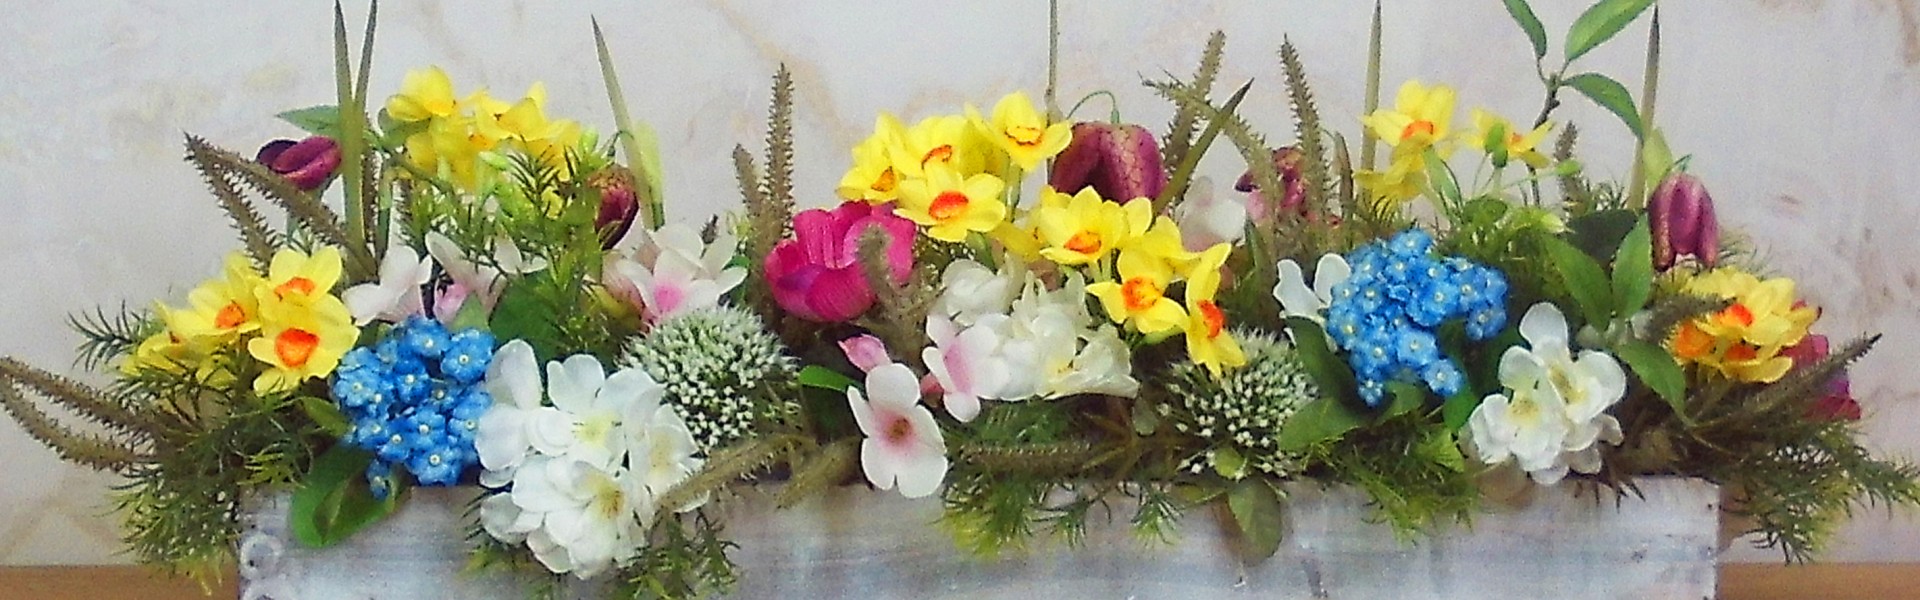 SPRING ARTIFICIAL FLOWERS